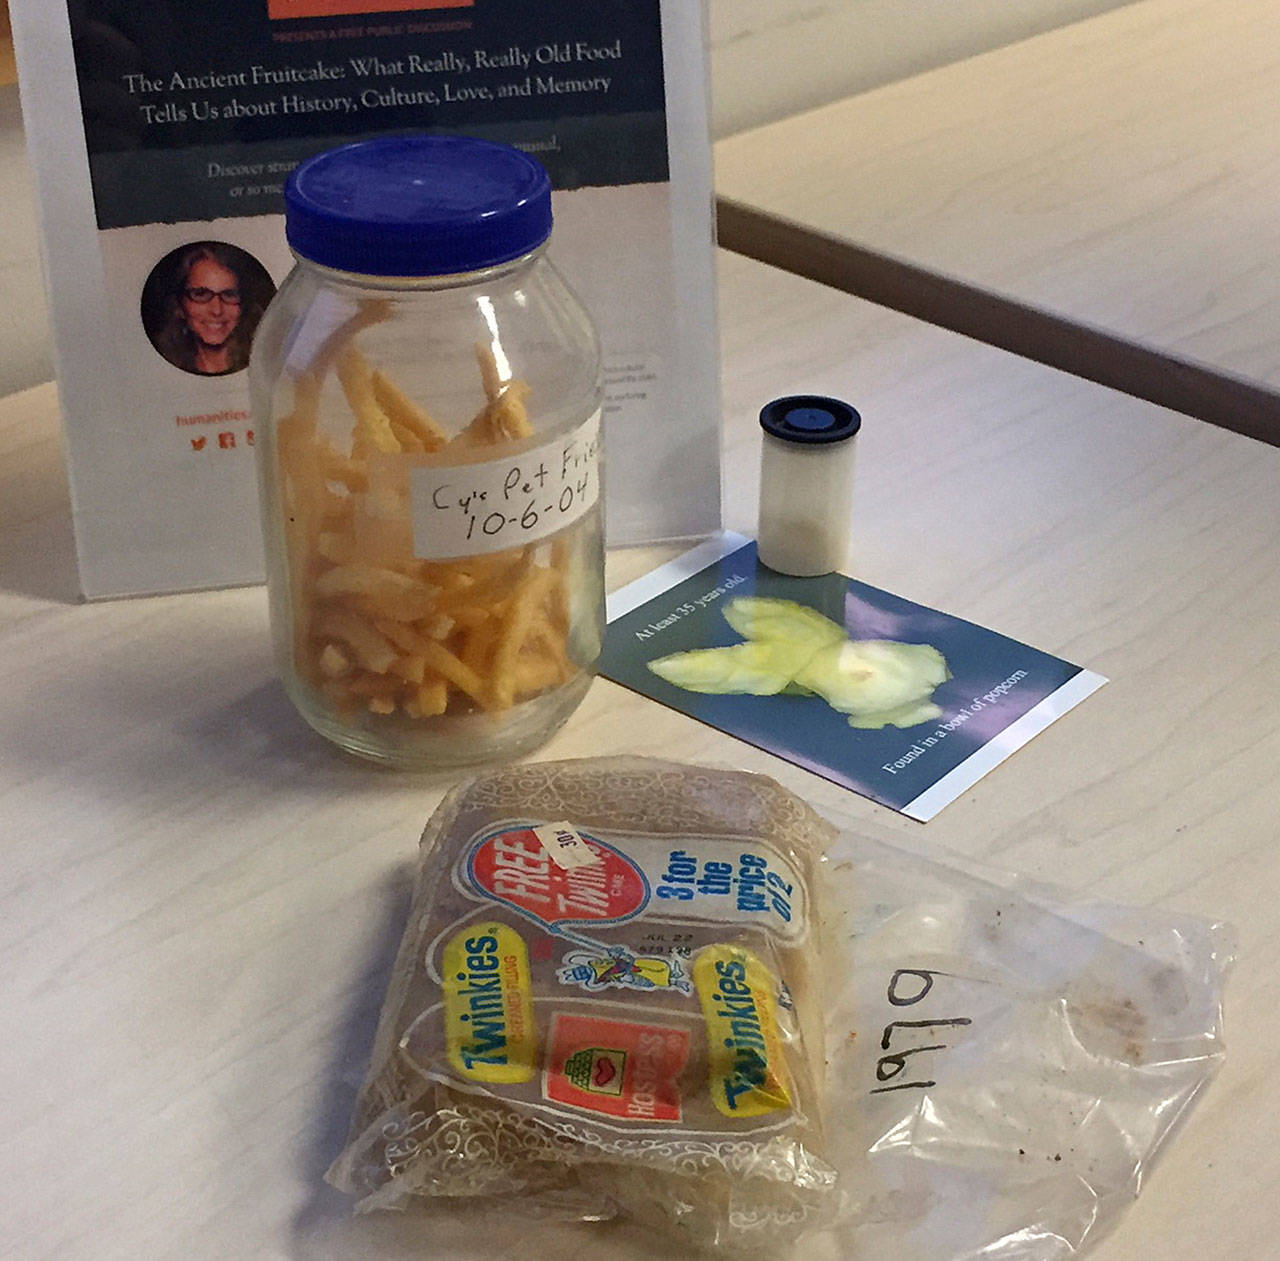 Photo provided.                                Some “old food” brought by an audience member. Twinkies from 1979, McDonald fries from 2004 and a piece of popcorn 35-years-old in the shape of the Playboy bunny logo.